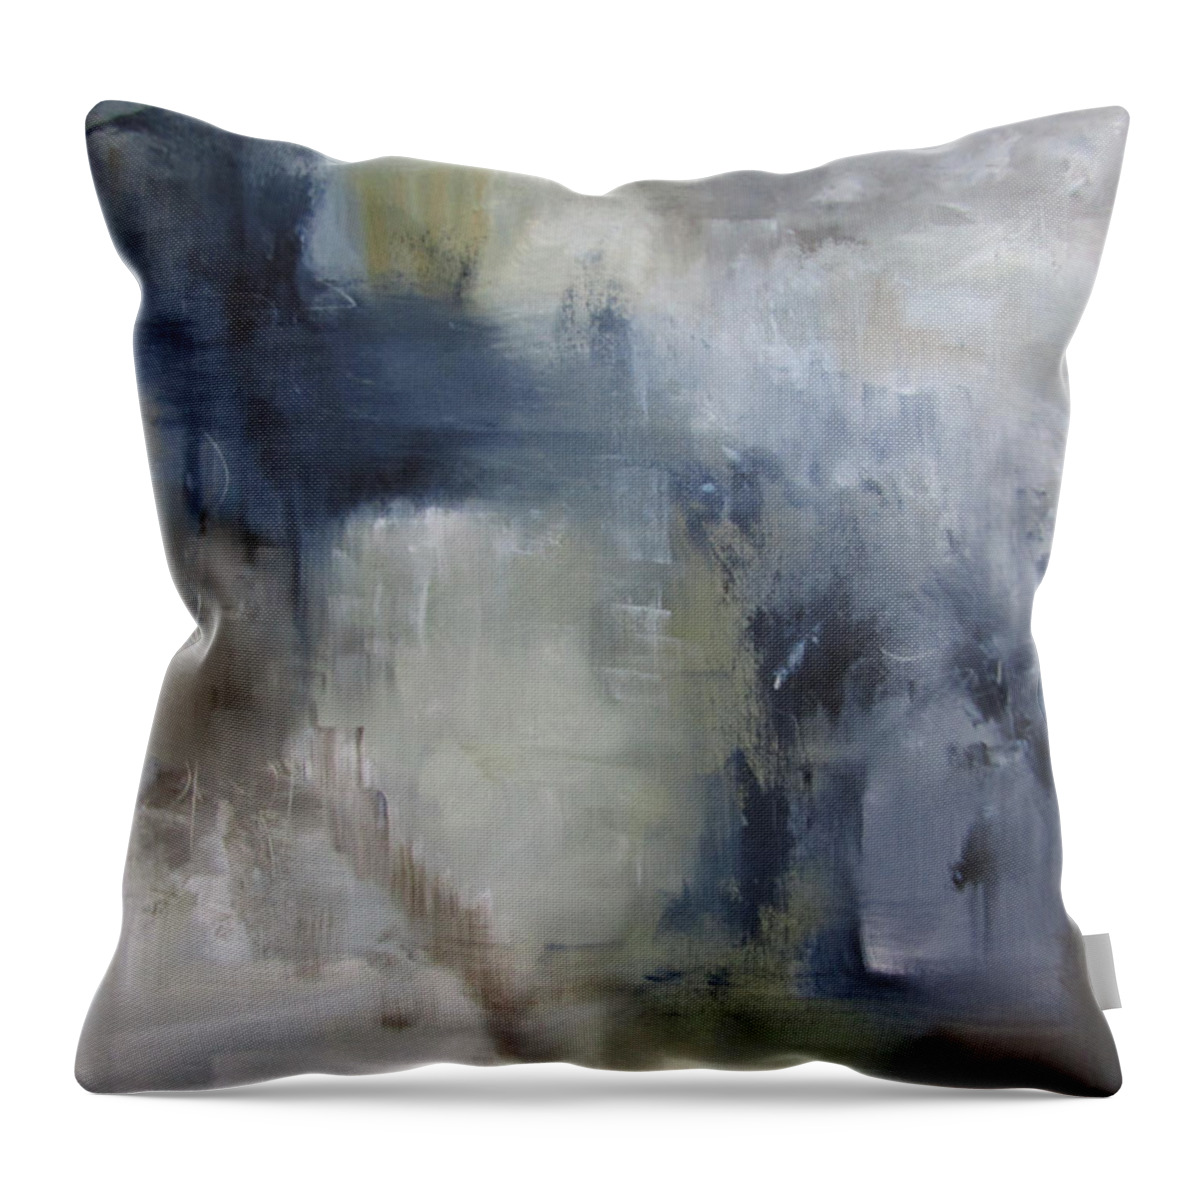 Abstract Throw Pillow featuring the painting All is not known by Roberta Rotunda